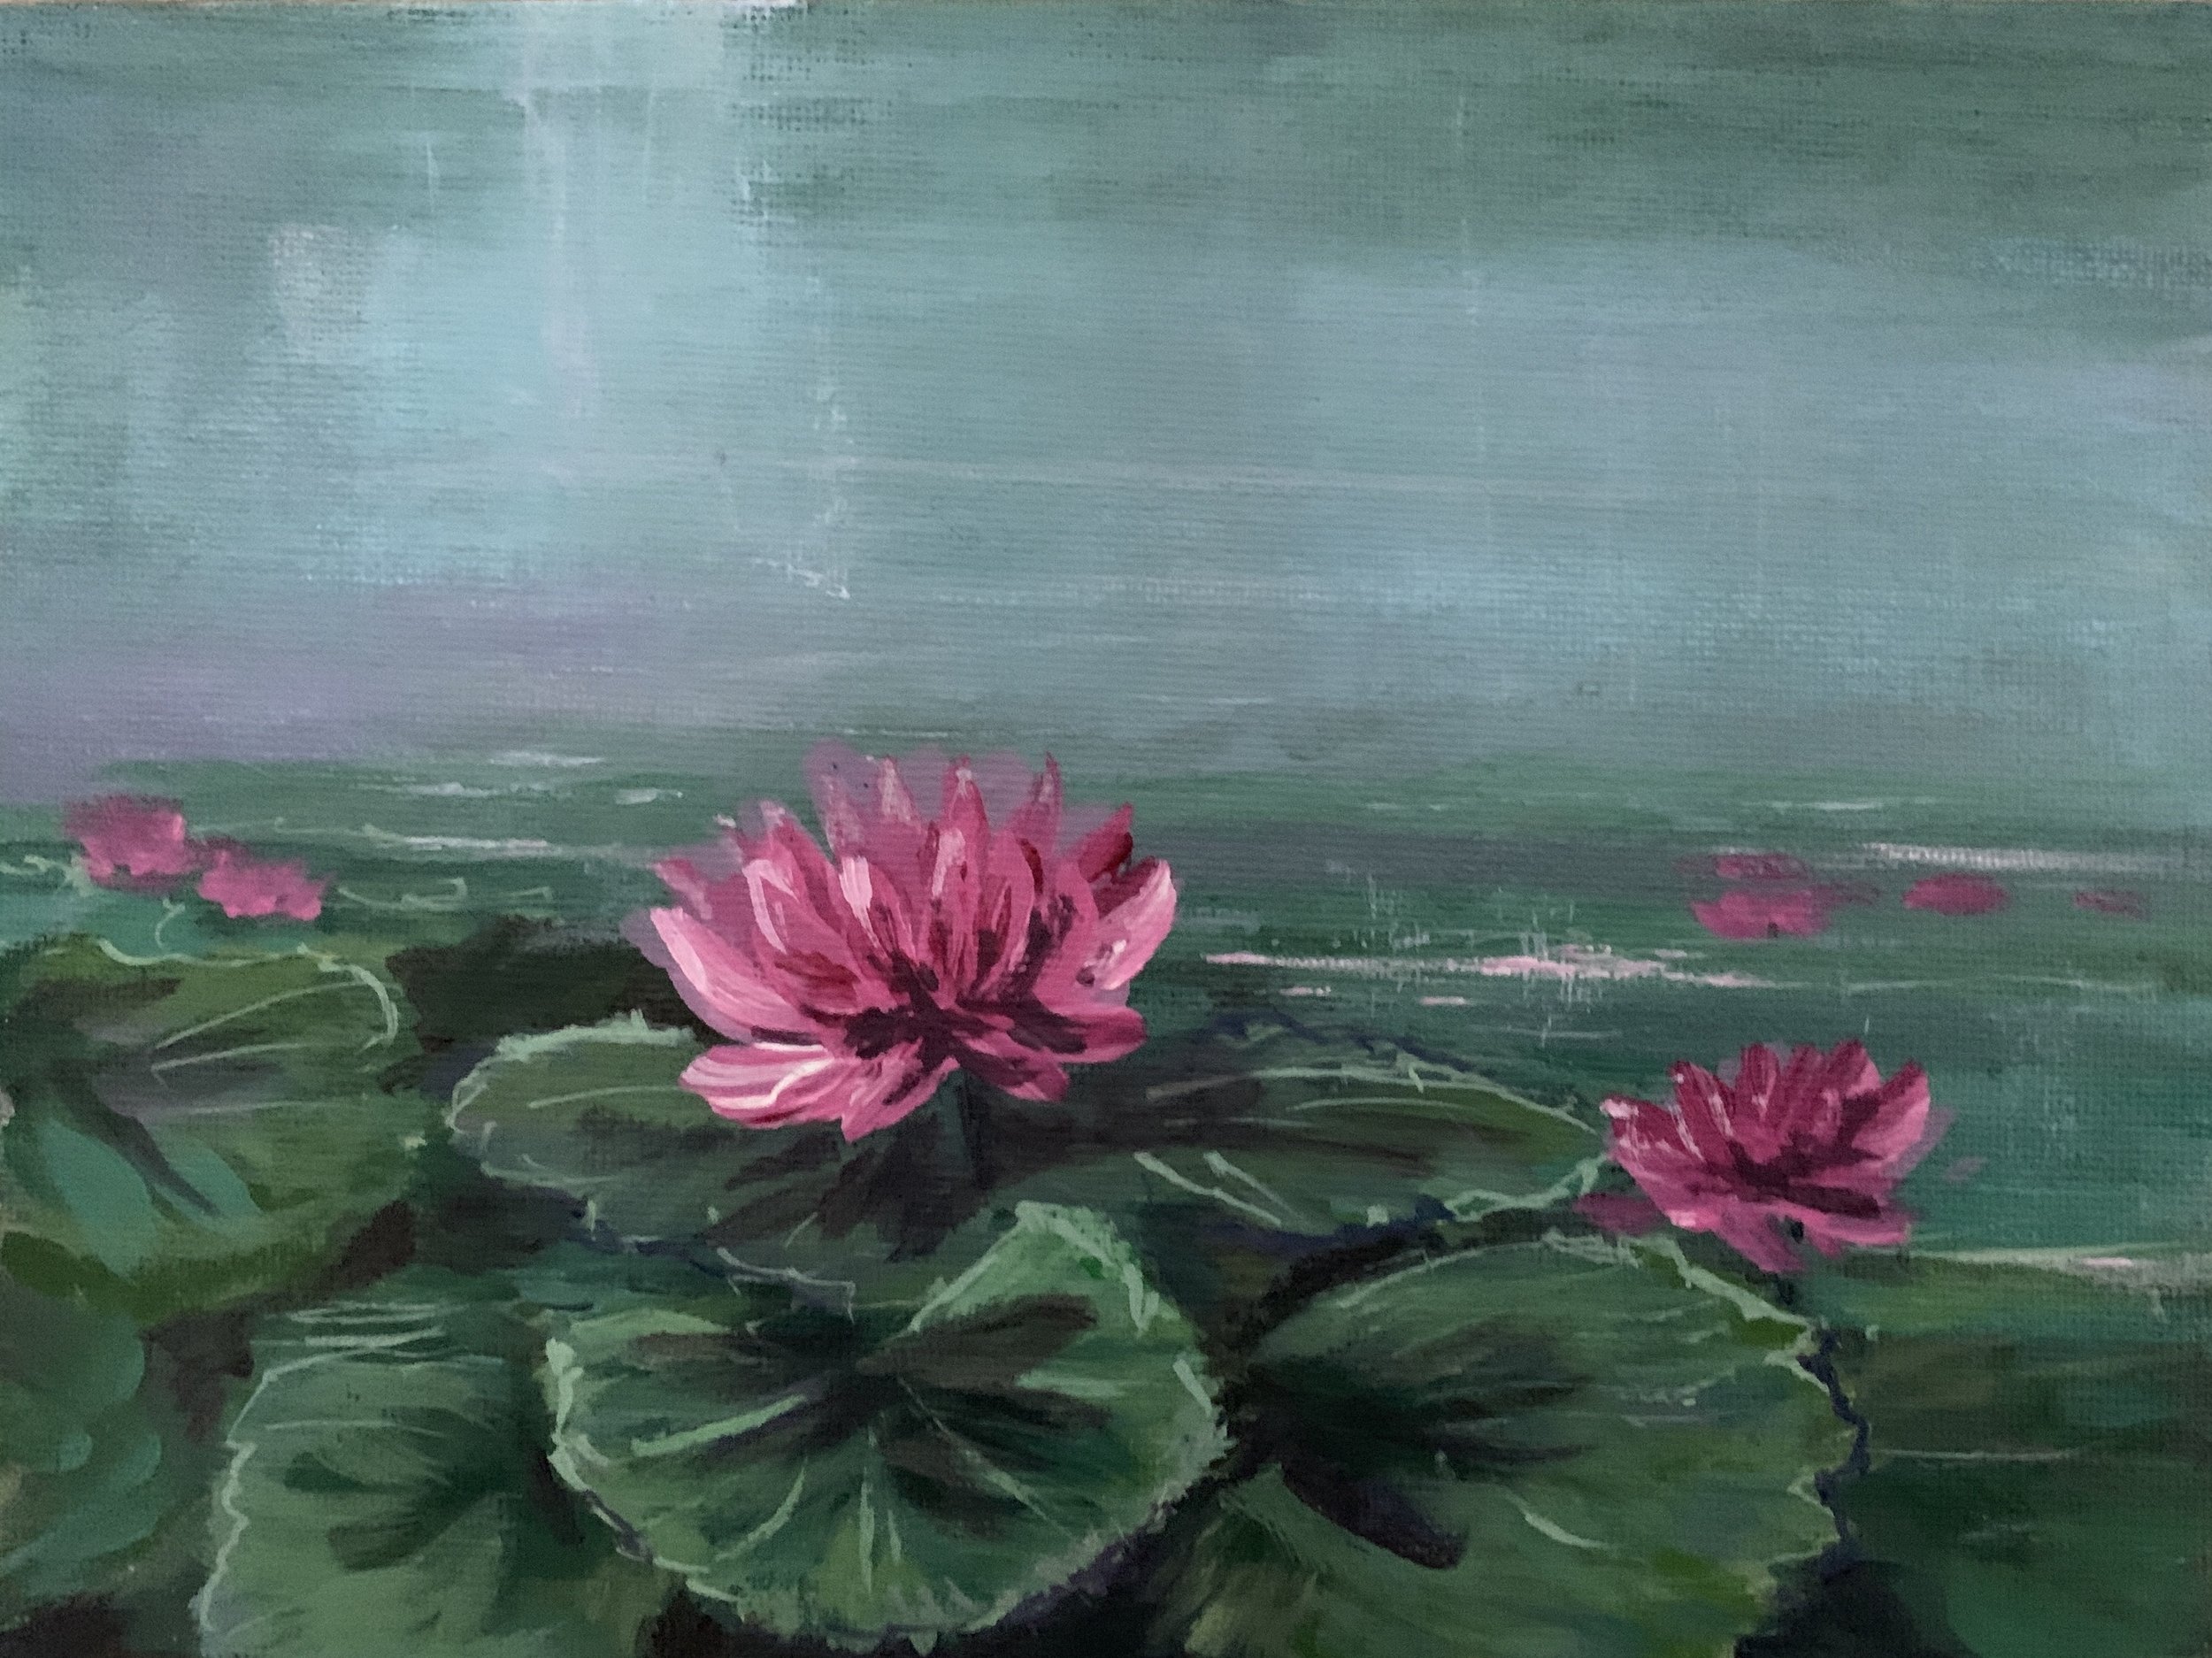 WATER LILIES     ACRYLIC ON CANVAS PANEL  6”X8”     $195.00  +tax